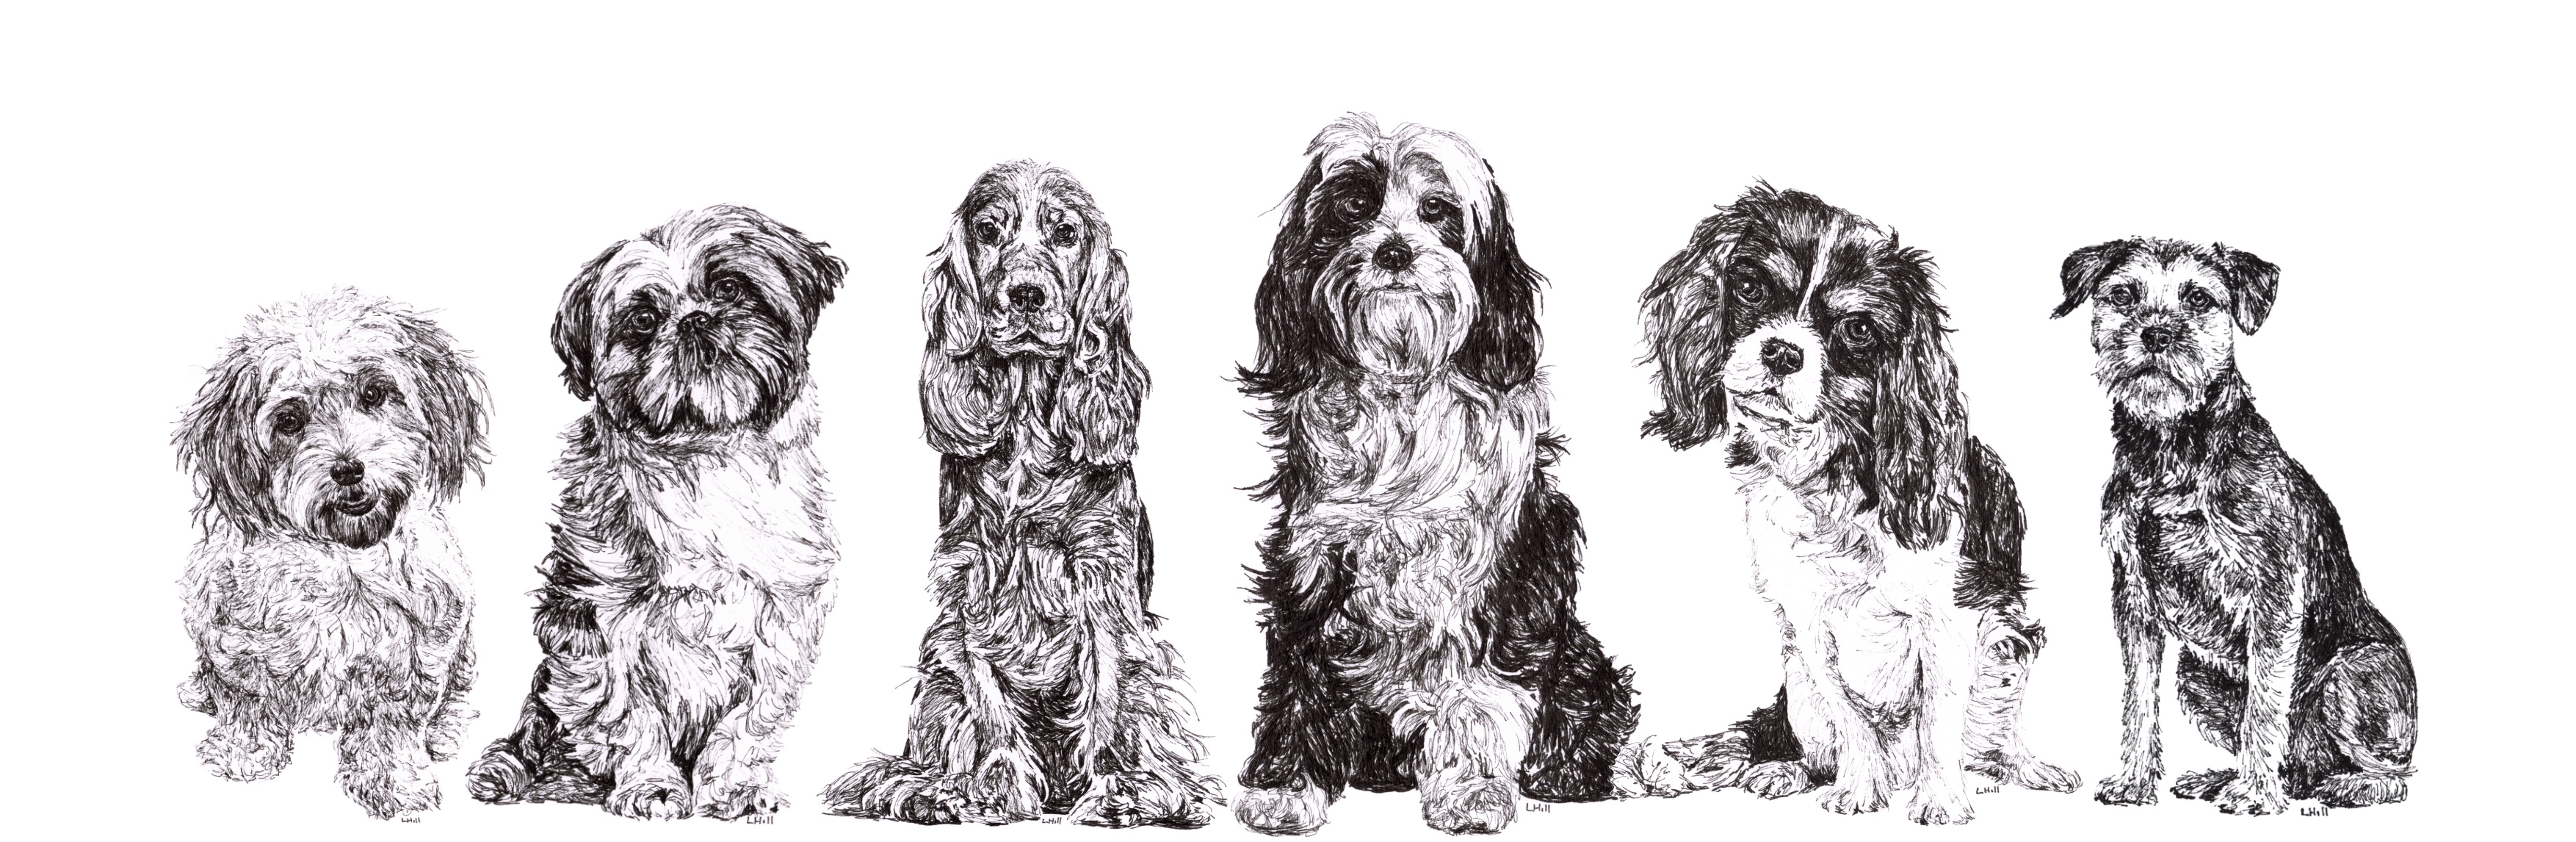 6 Dogs, Cavachon, Shih Tzu, Cocker Spaniel, Tibetan Terrier, Cavalier King Charles Spaniel and Border Terrier pen and ink illustration by Louisa Hill